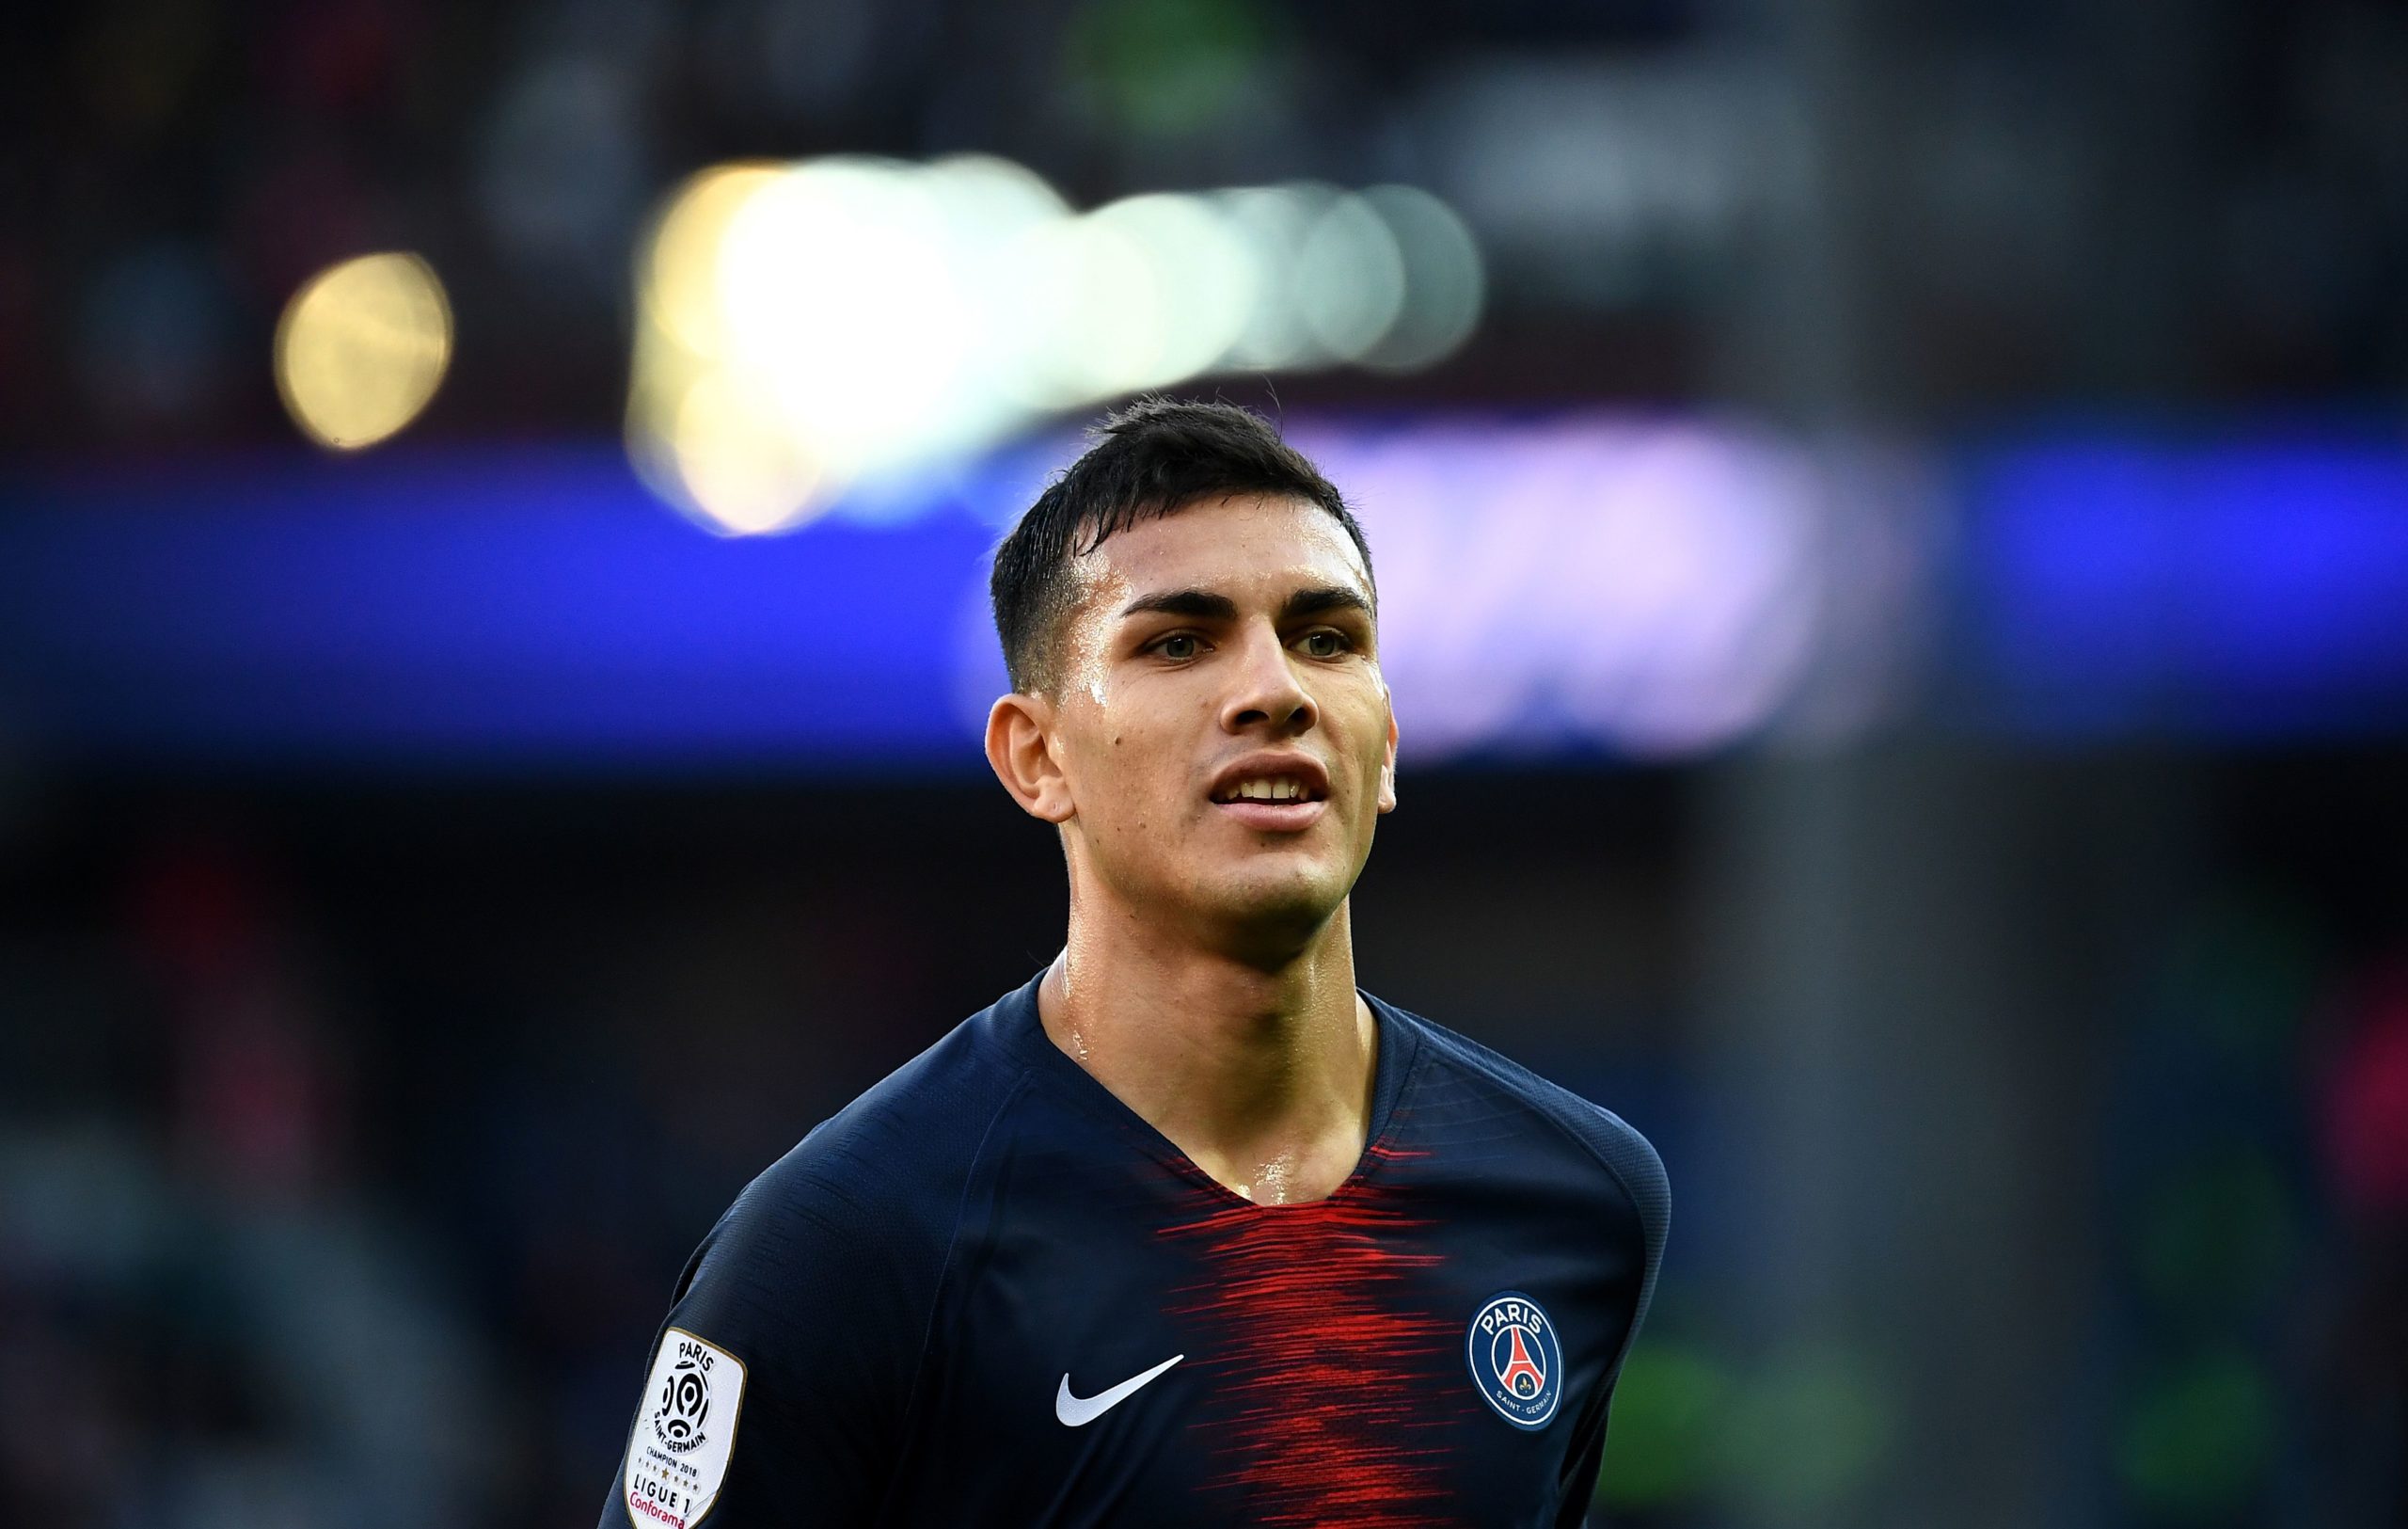 Juventus have all but confirmed the transfer of Paris Saint-Germain outcast Leandro Paredes. Arsenal were rejected in the last minute by the player himself.